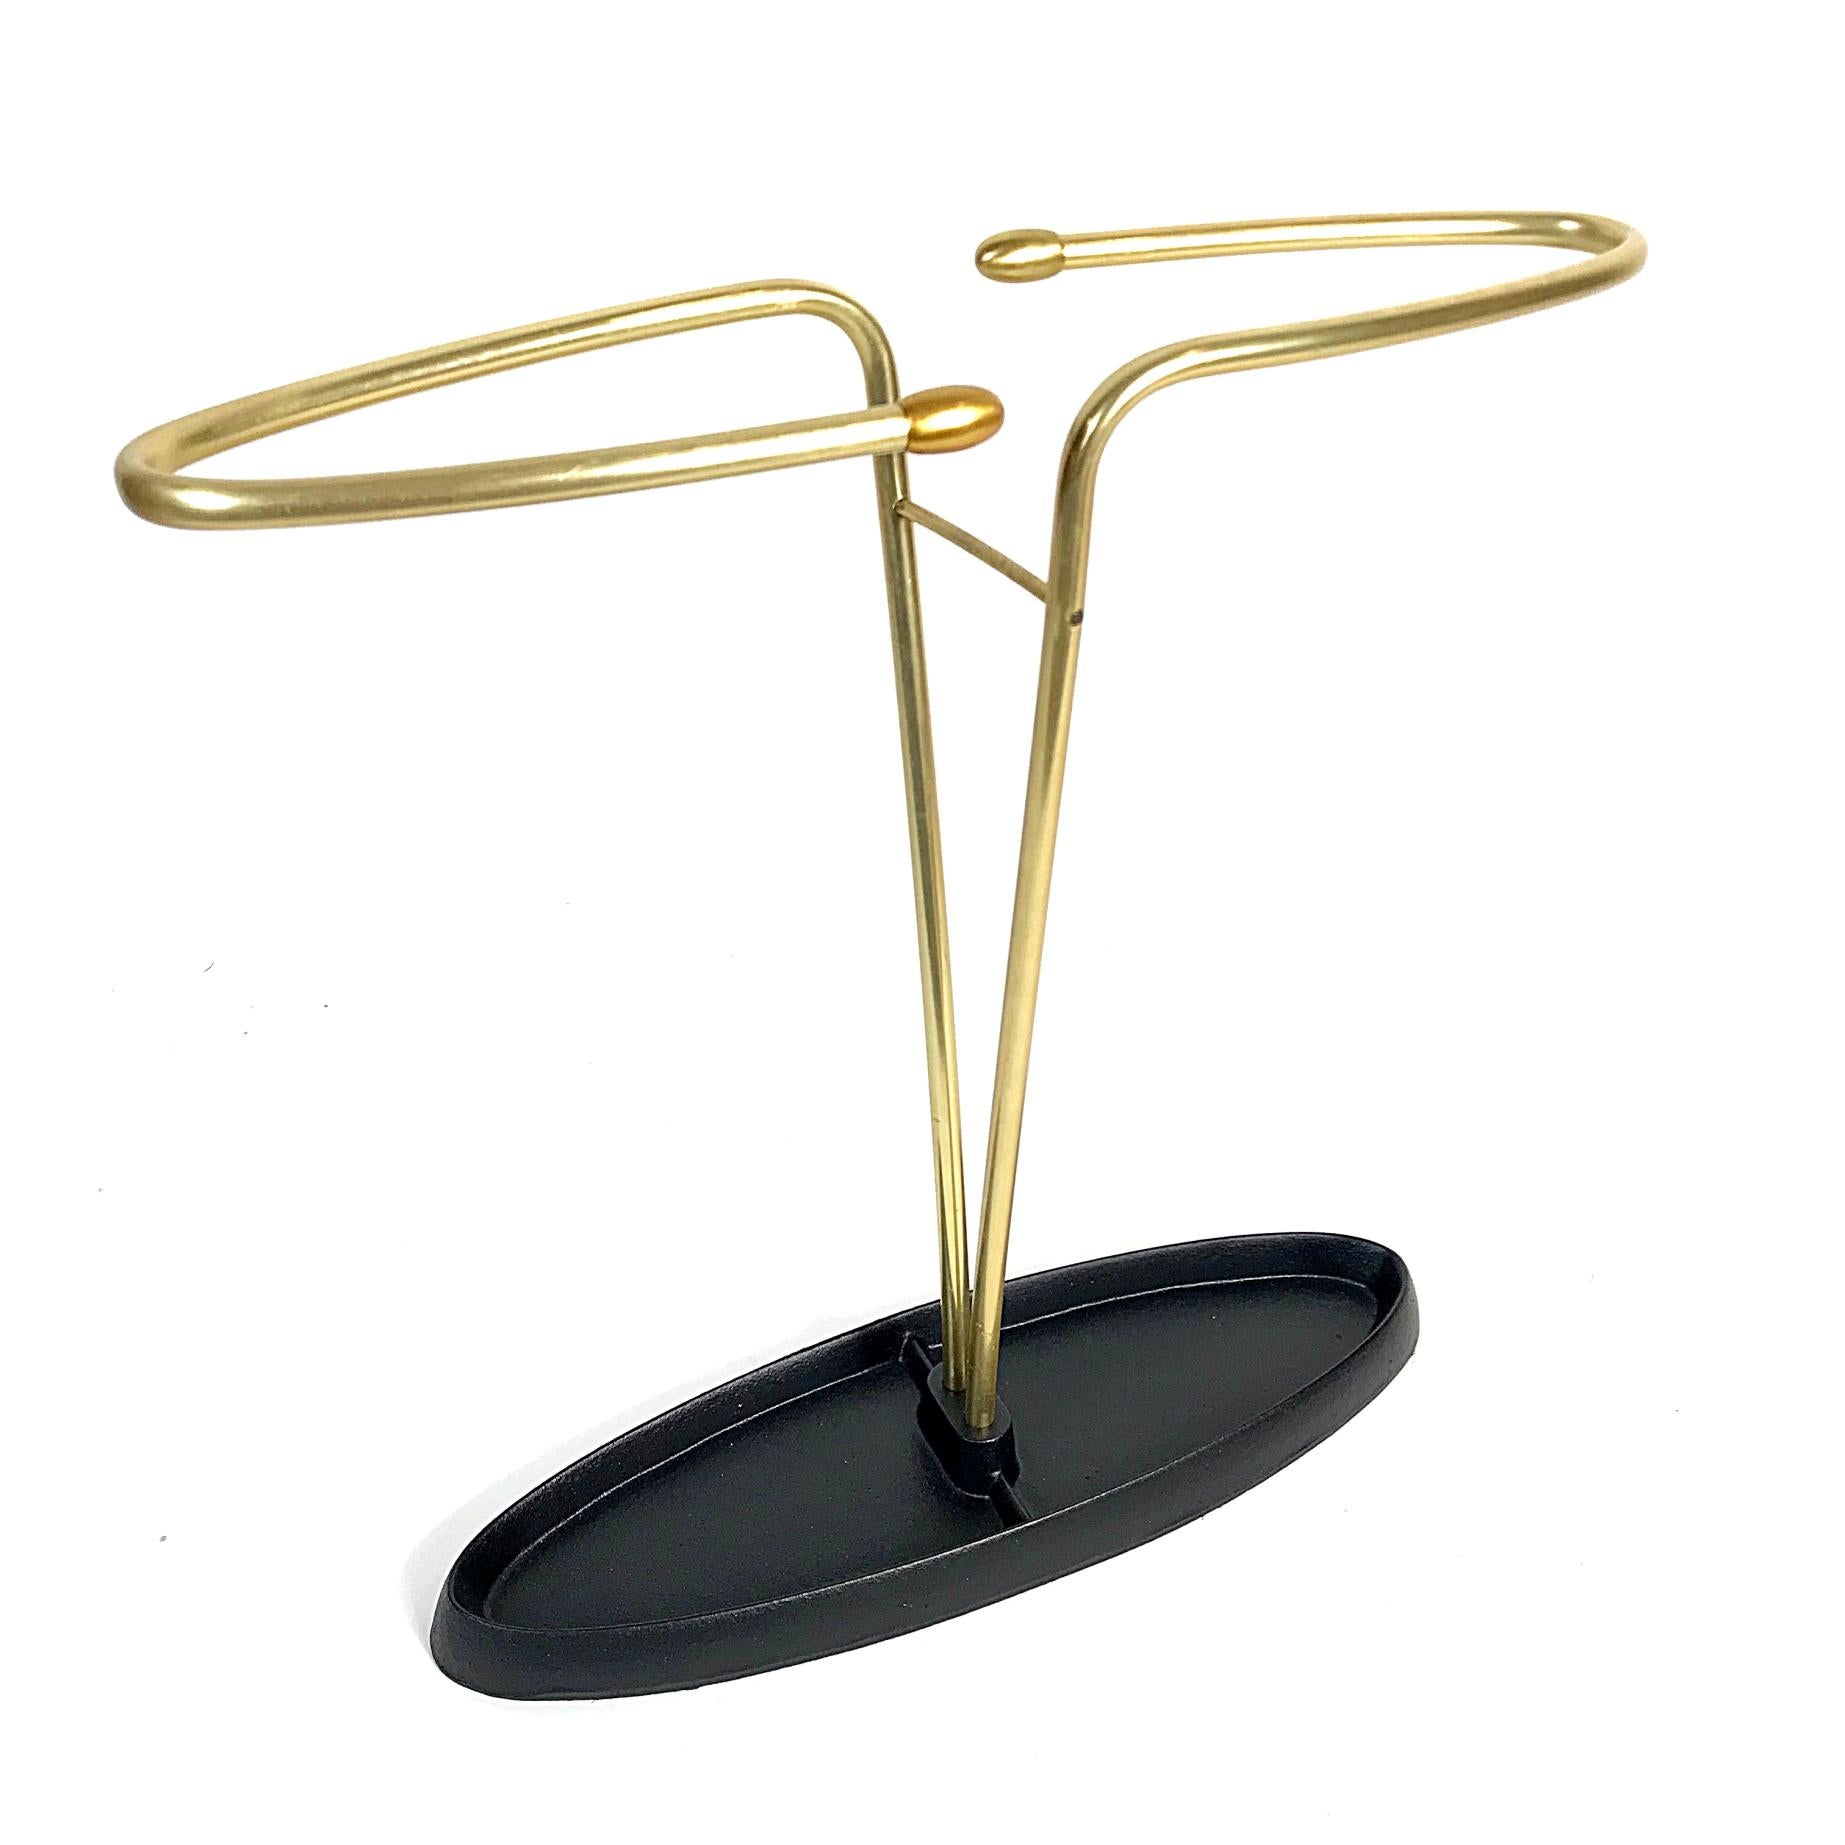 Simple and elegant midcentury umbrella stand manufactured in the 1950s, Austria. Black lacquered iron and brass.

We ship with DHL-Express.